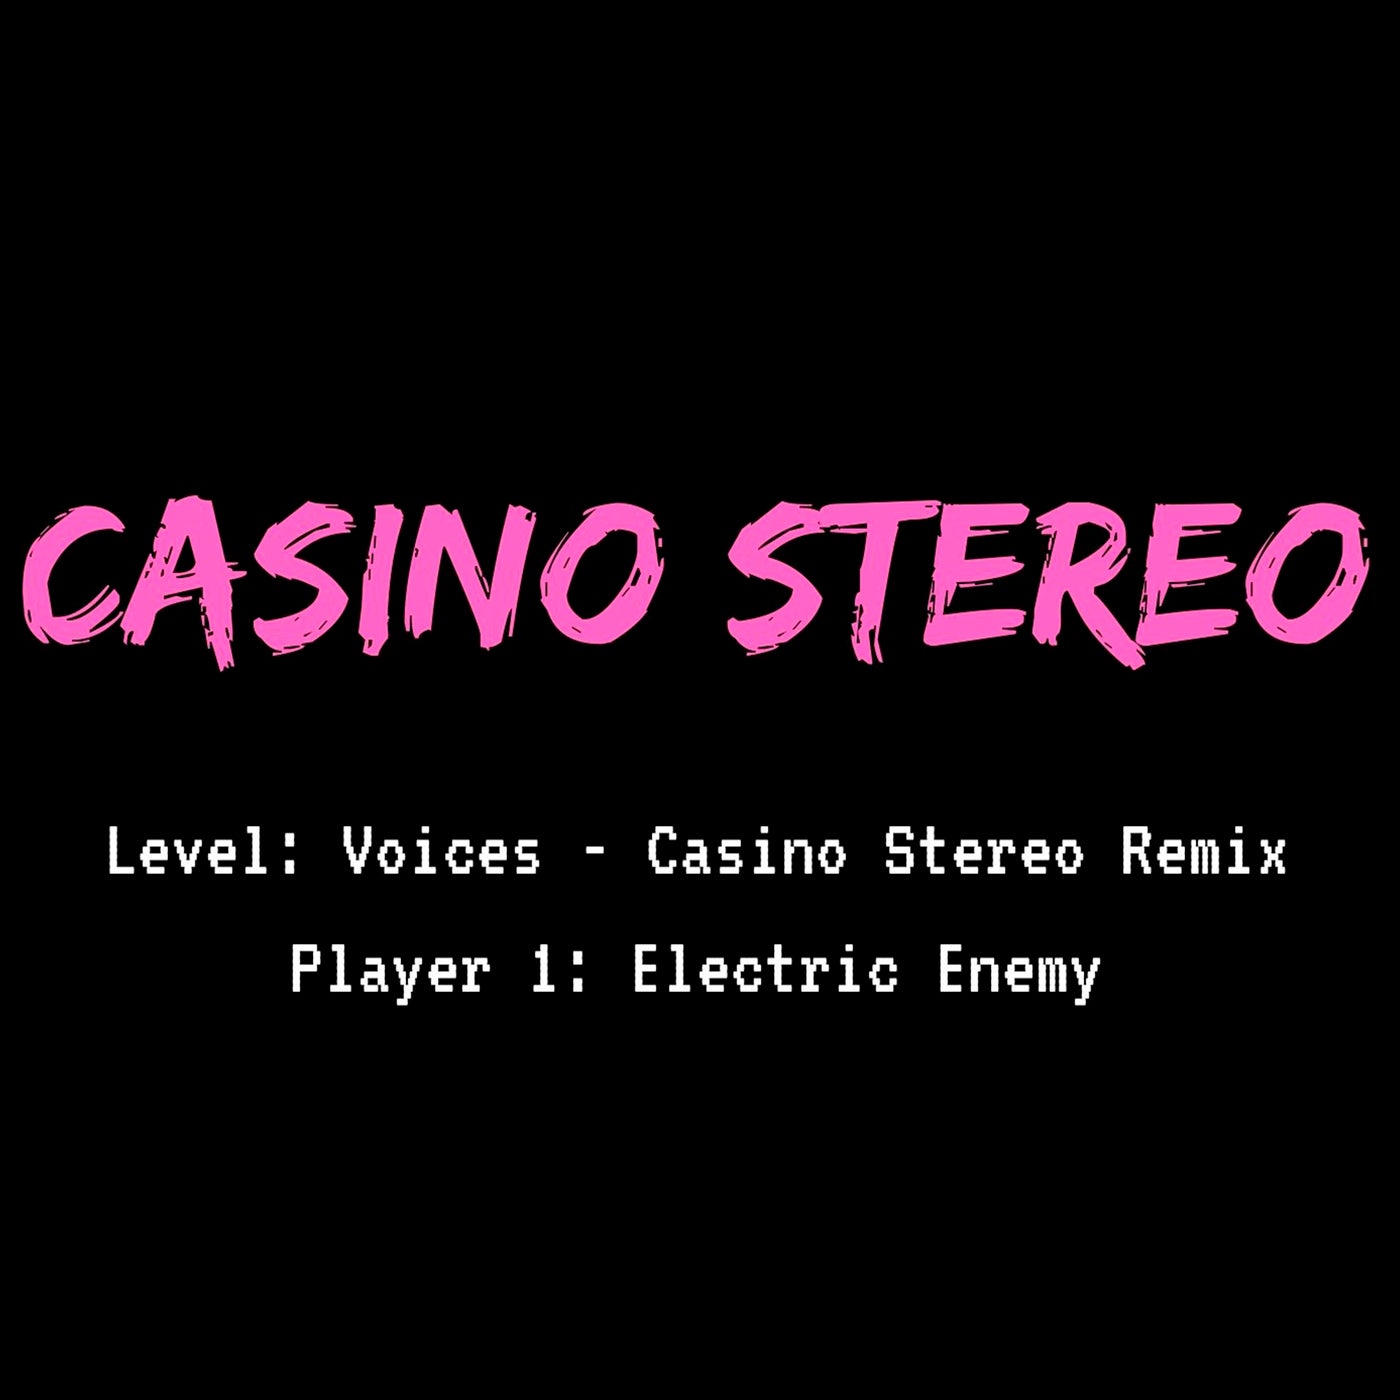 Voices (Casino Stereo Remix)